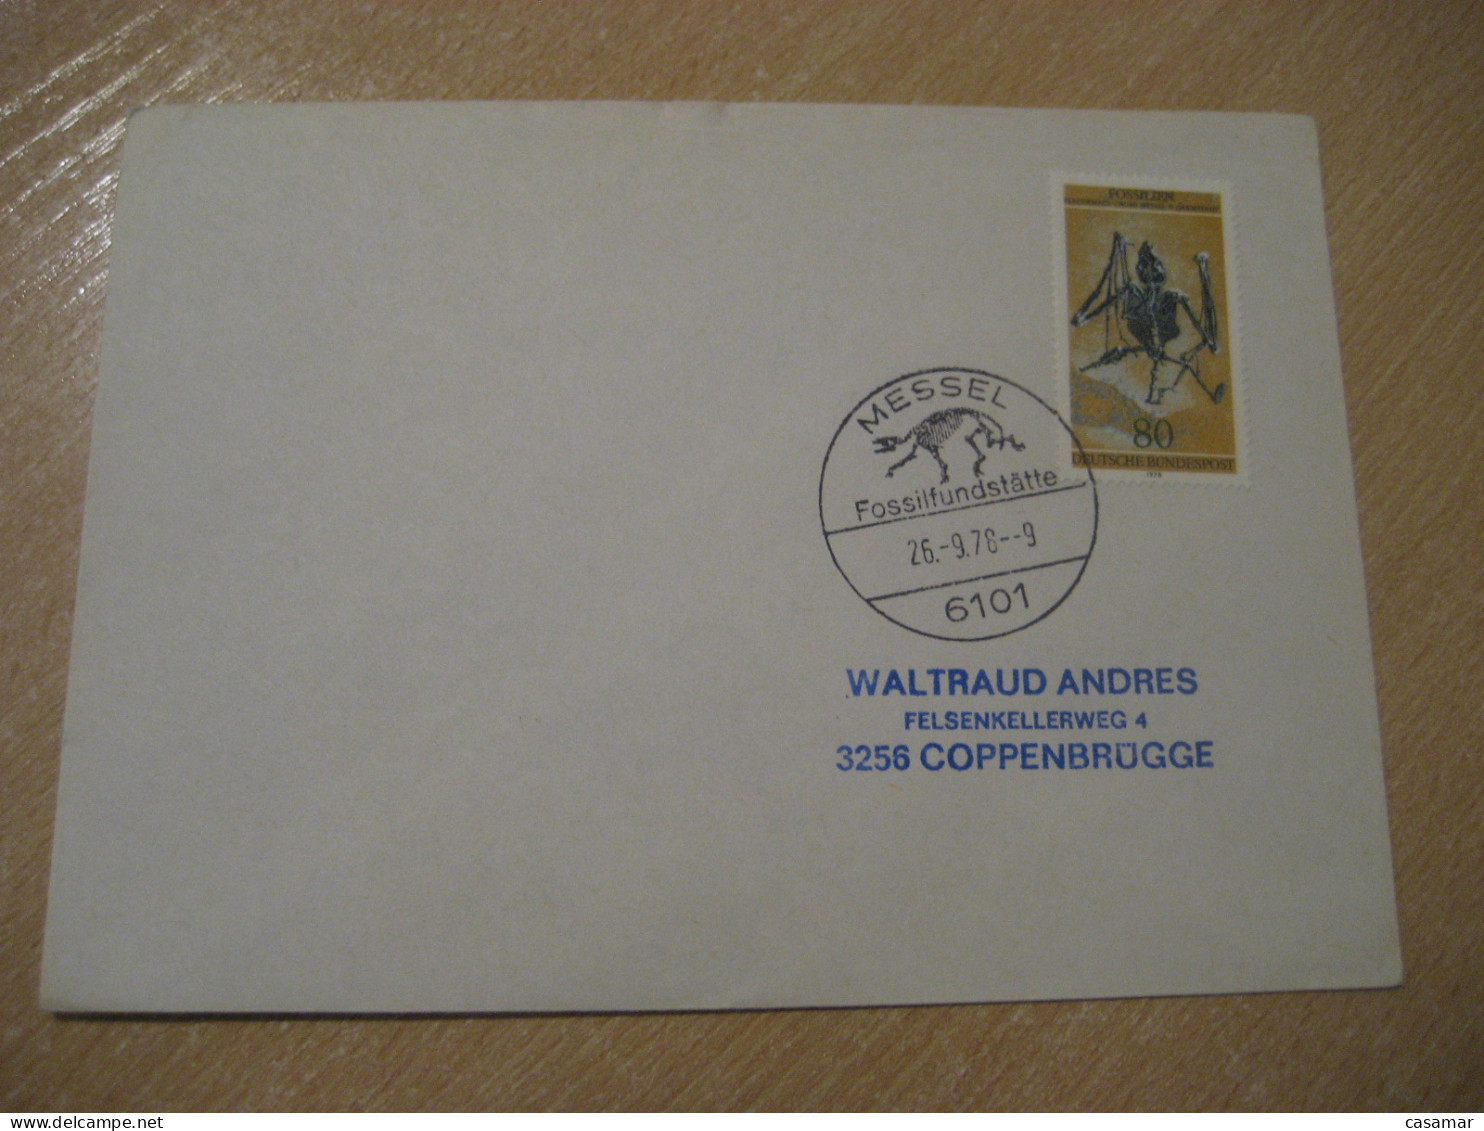 MESSEL 1978 Fossil Deposit Fledermaus Cancel Cover GERMANY Fossil Fossils Animals Fossiles Geology Geologie - Fossils